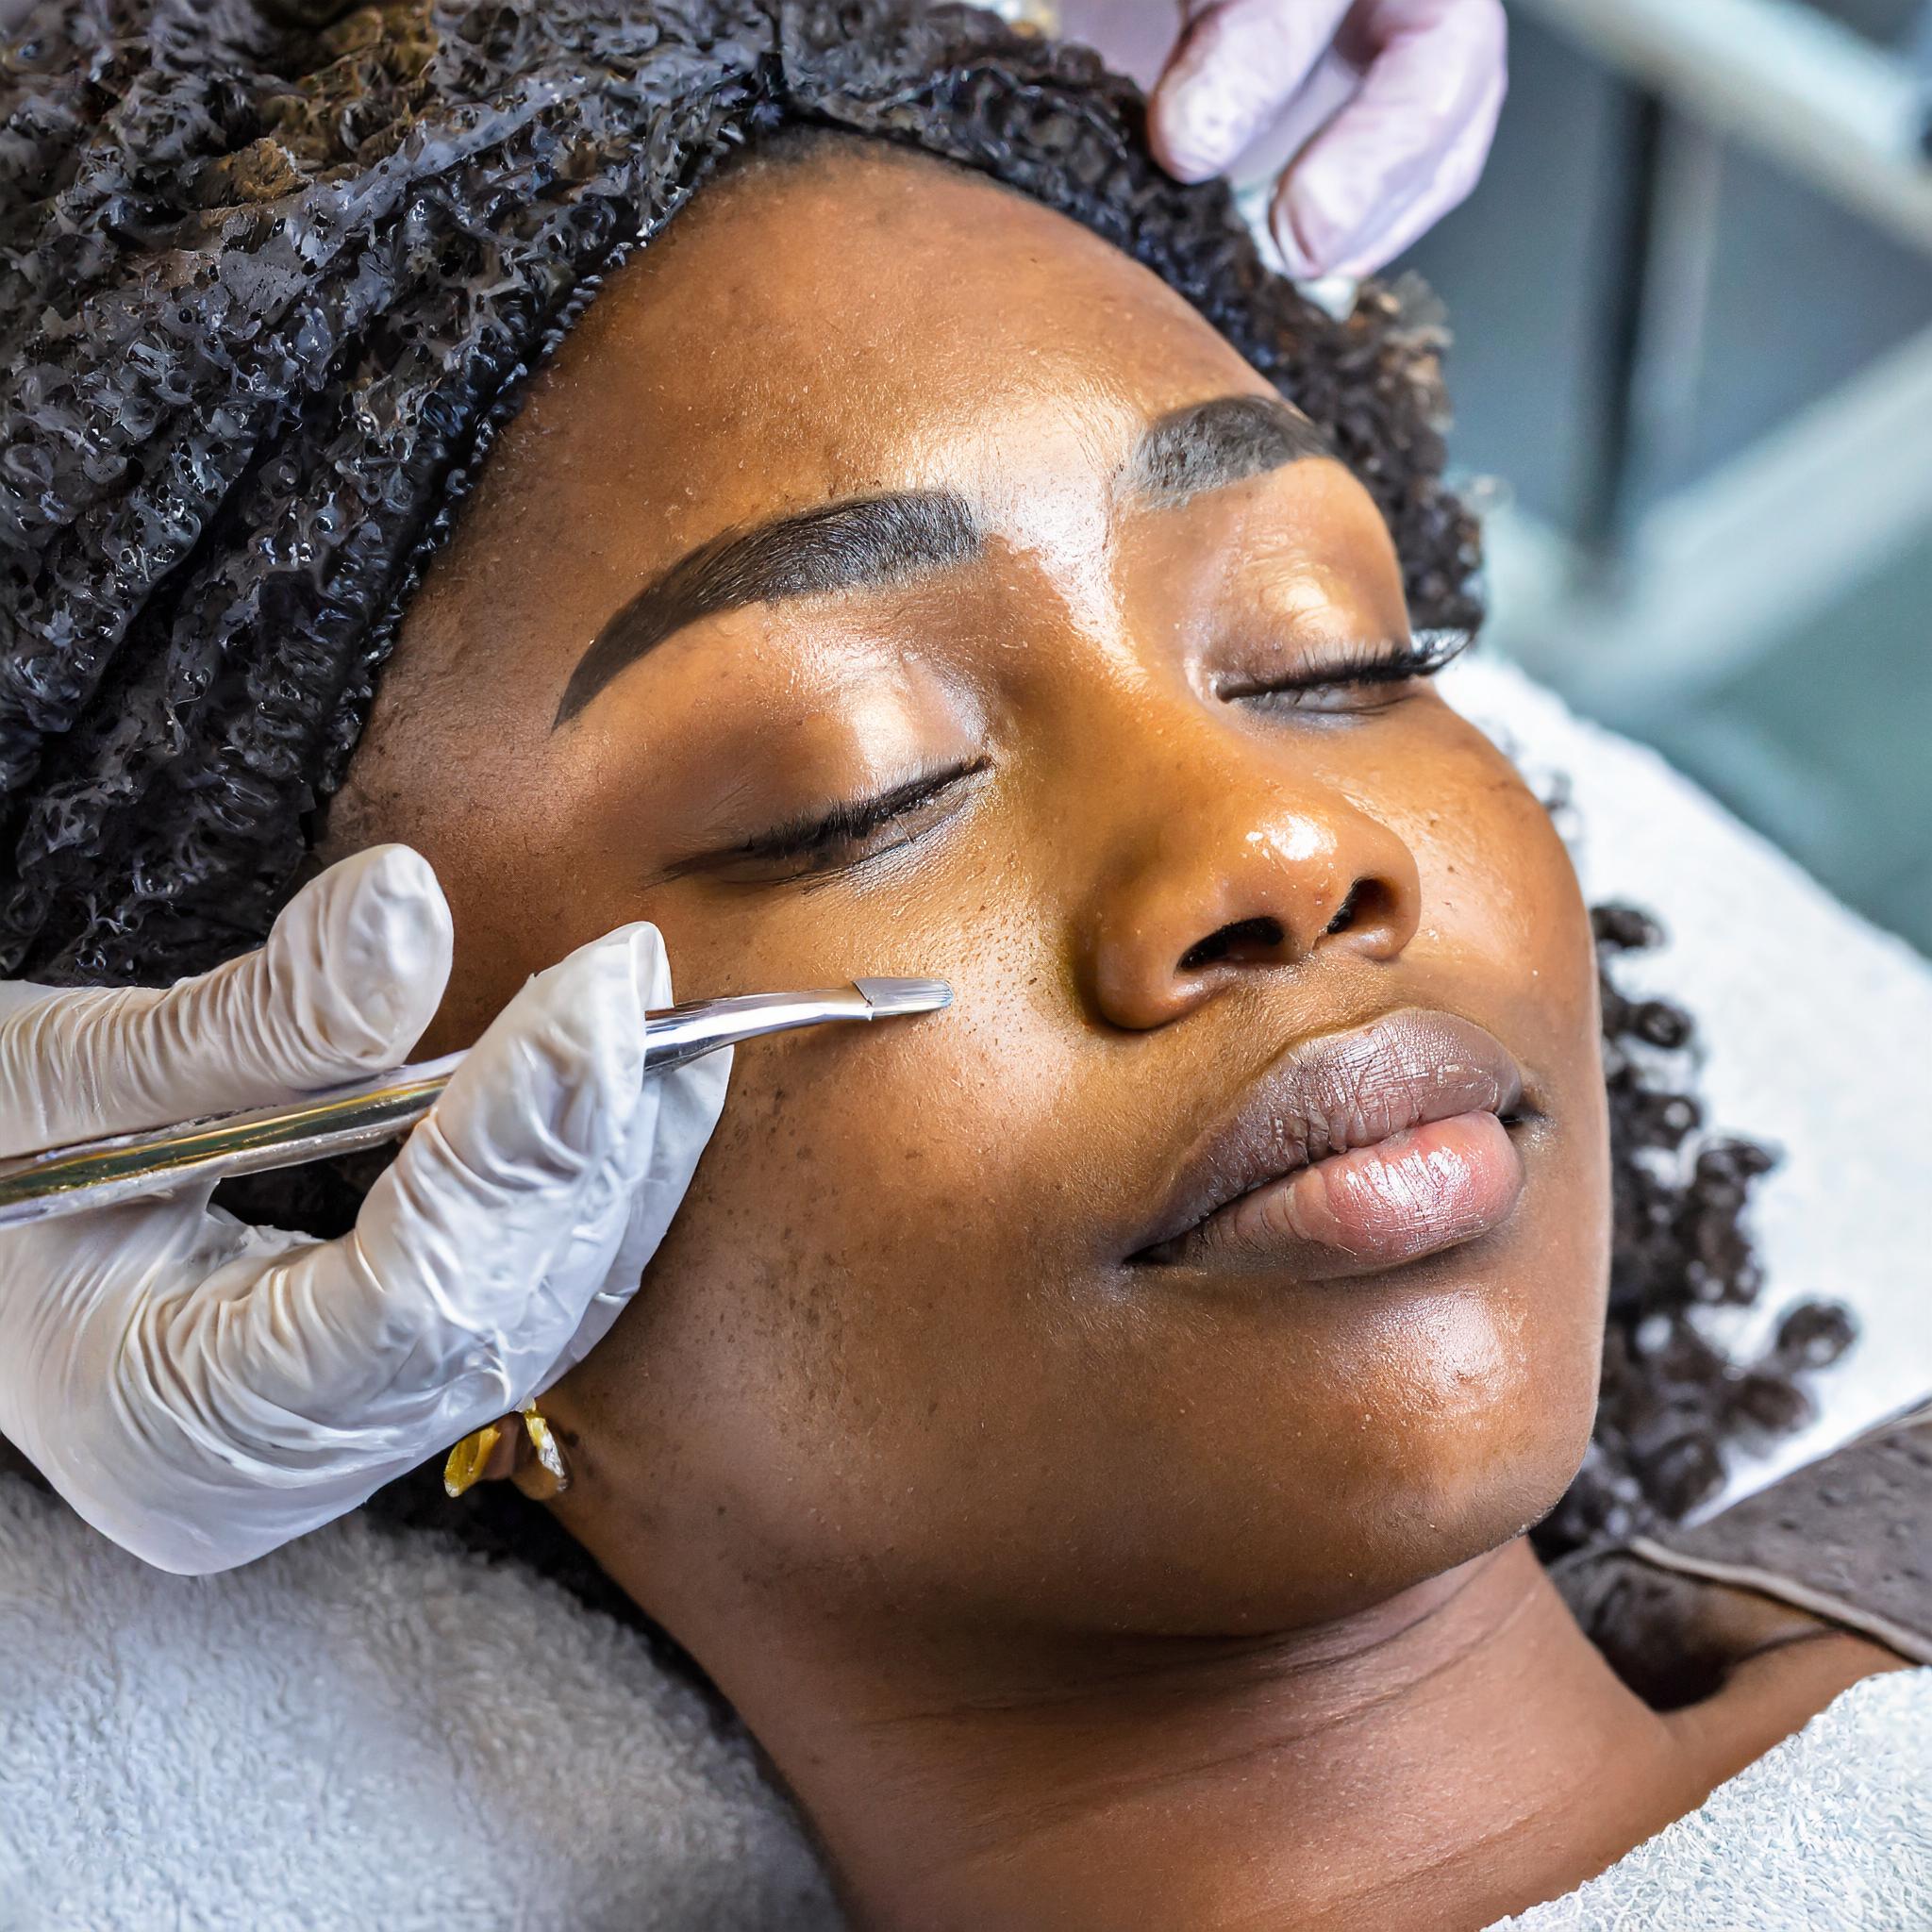 Dermaplaning treatment on a woman's face. Scalpel is being used on her cheek area, her eyes are closed and she looks relaxed.